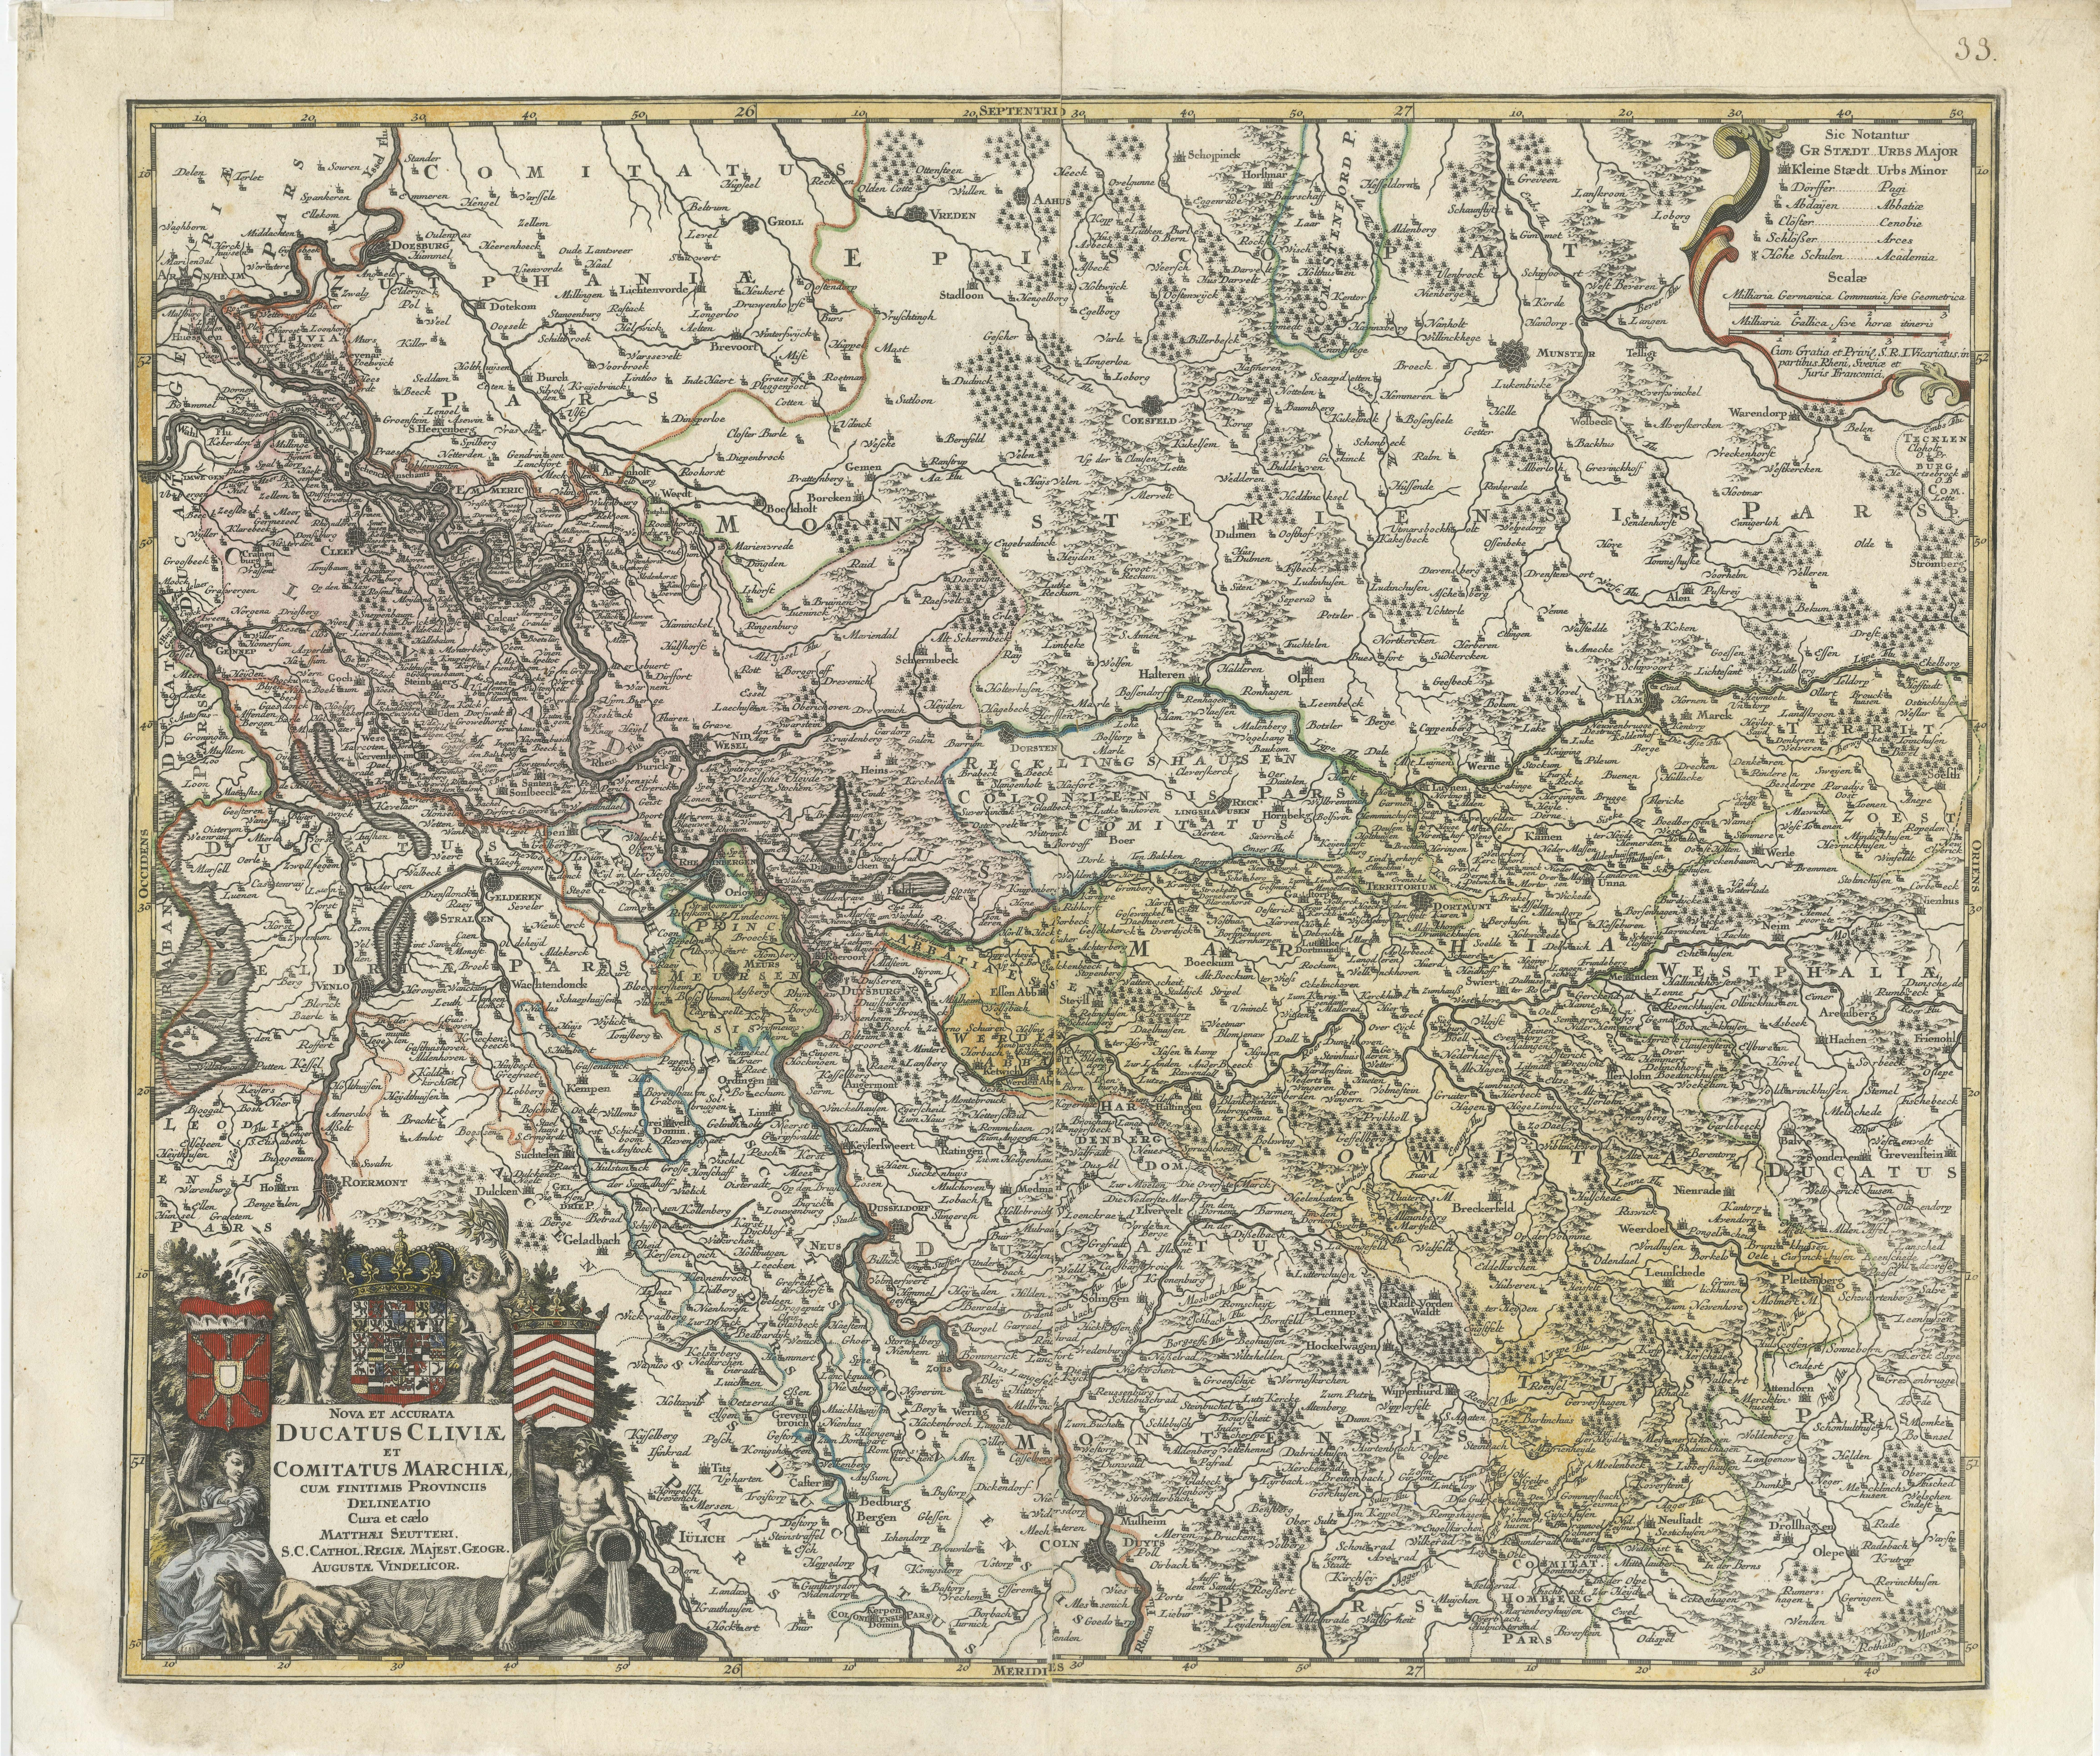 Antique map titled 'Nova et Accurata Ducatus Cliviae et Comitatus Marchiae (..)'. Detailed regional map of Germany showing the region bounded by the Maas River in the west and to part of Westphalia in the East. The map is centered on the Rhine